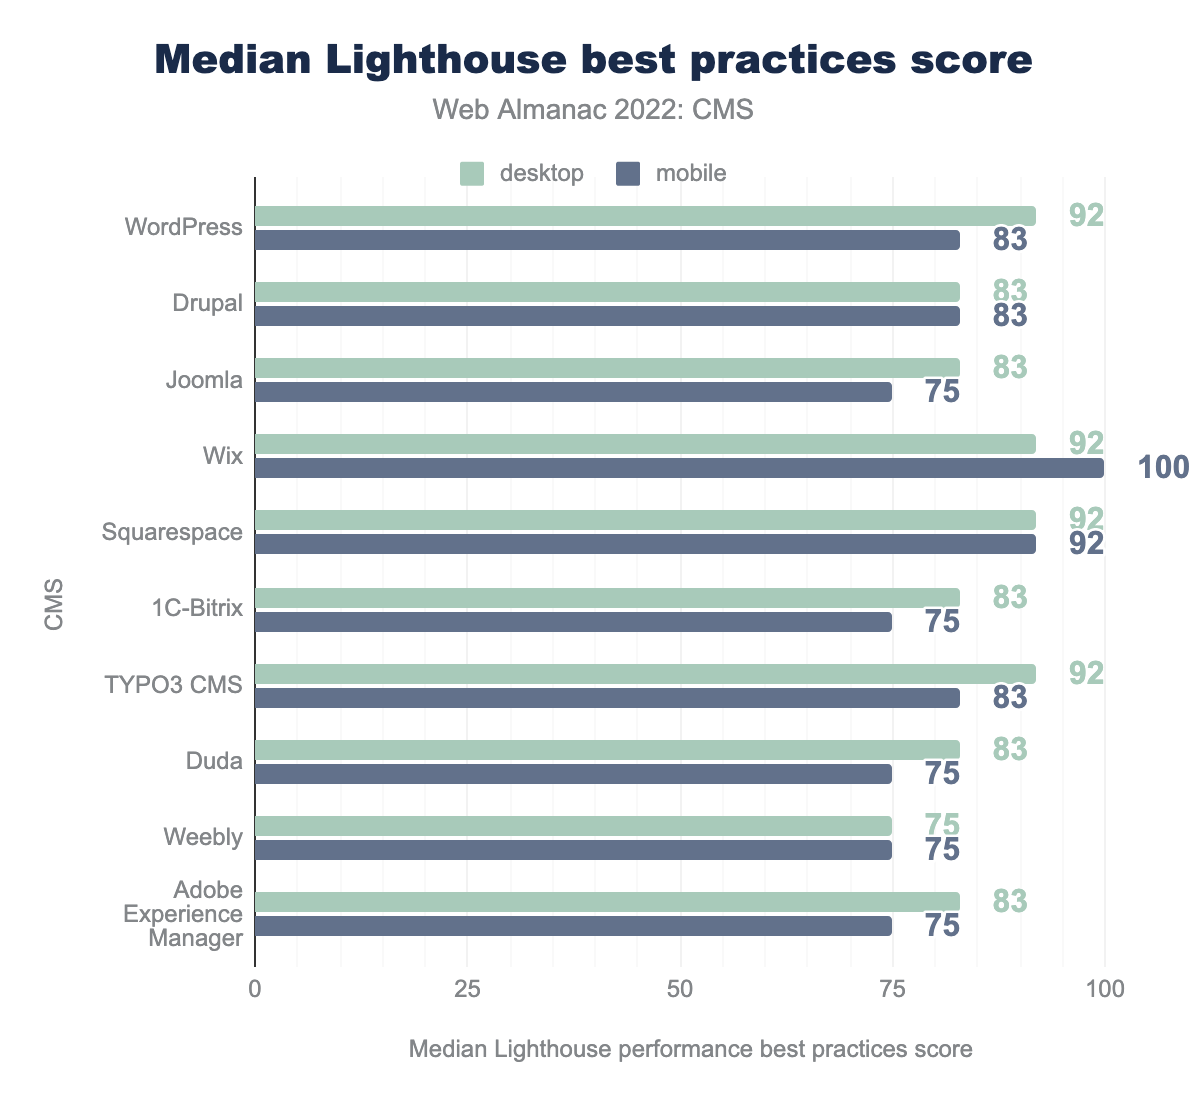 Media Lighthouse best practices scores.